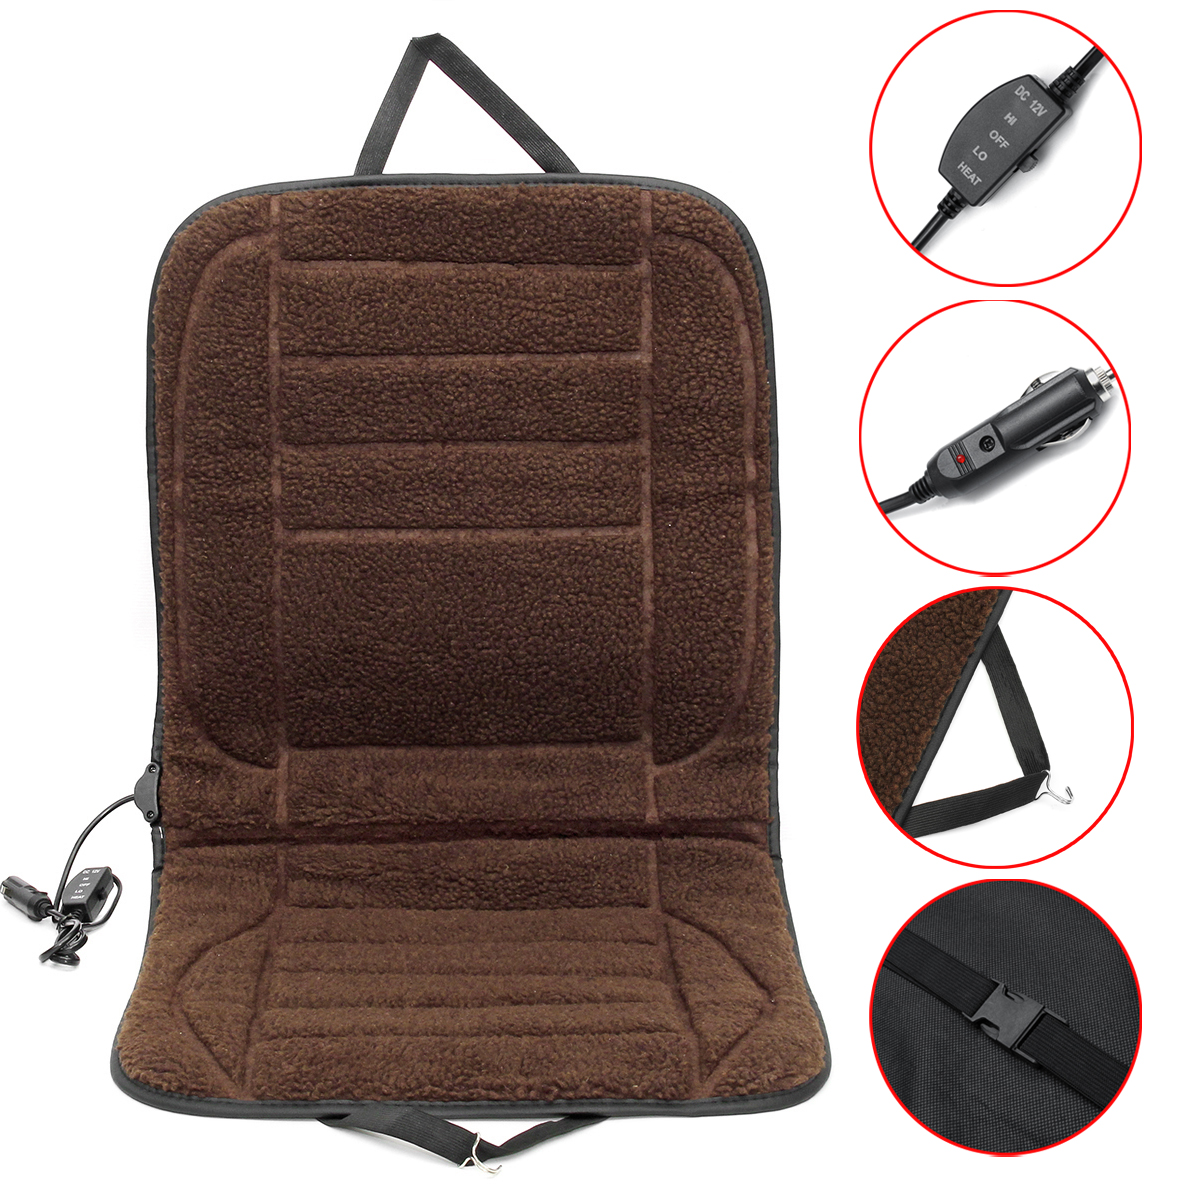 12V-Car-Van-Front-Seat-Heated-Cushion-Seat-Warmer-Winter-Household-Cover-Electric-Heating-Mat-Brown-1386527